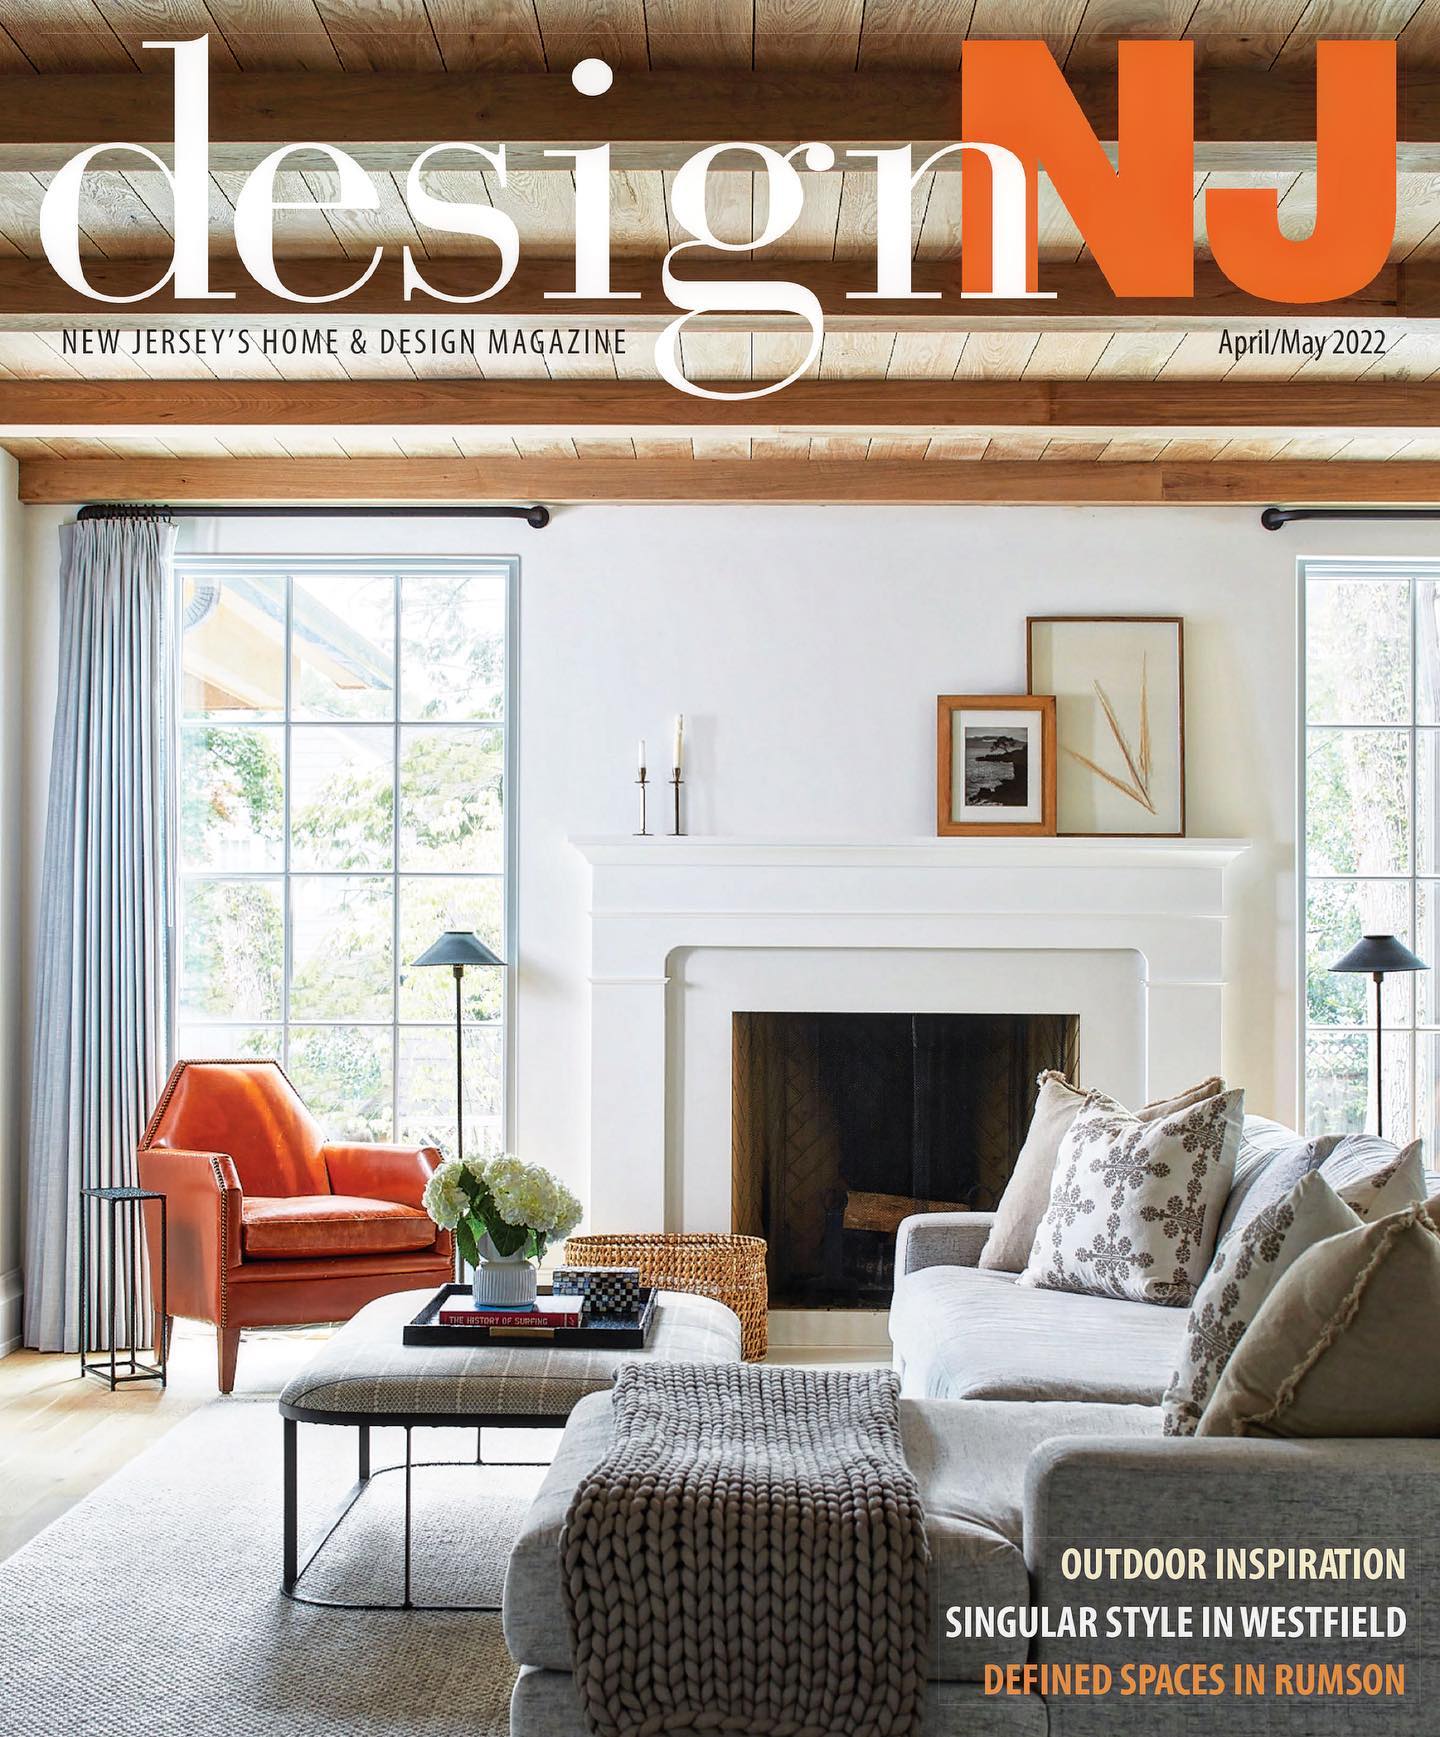 Subscribe to Design Nj and Get a Risk-Free Trial!